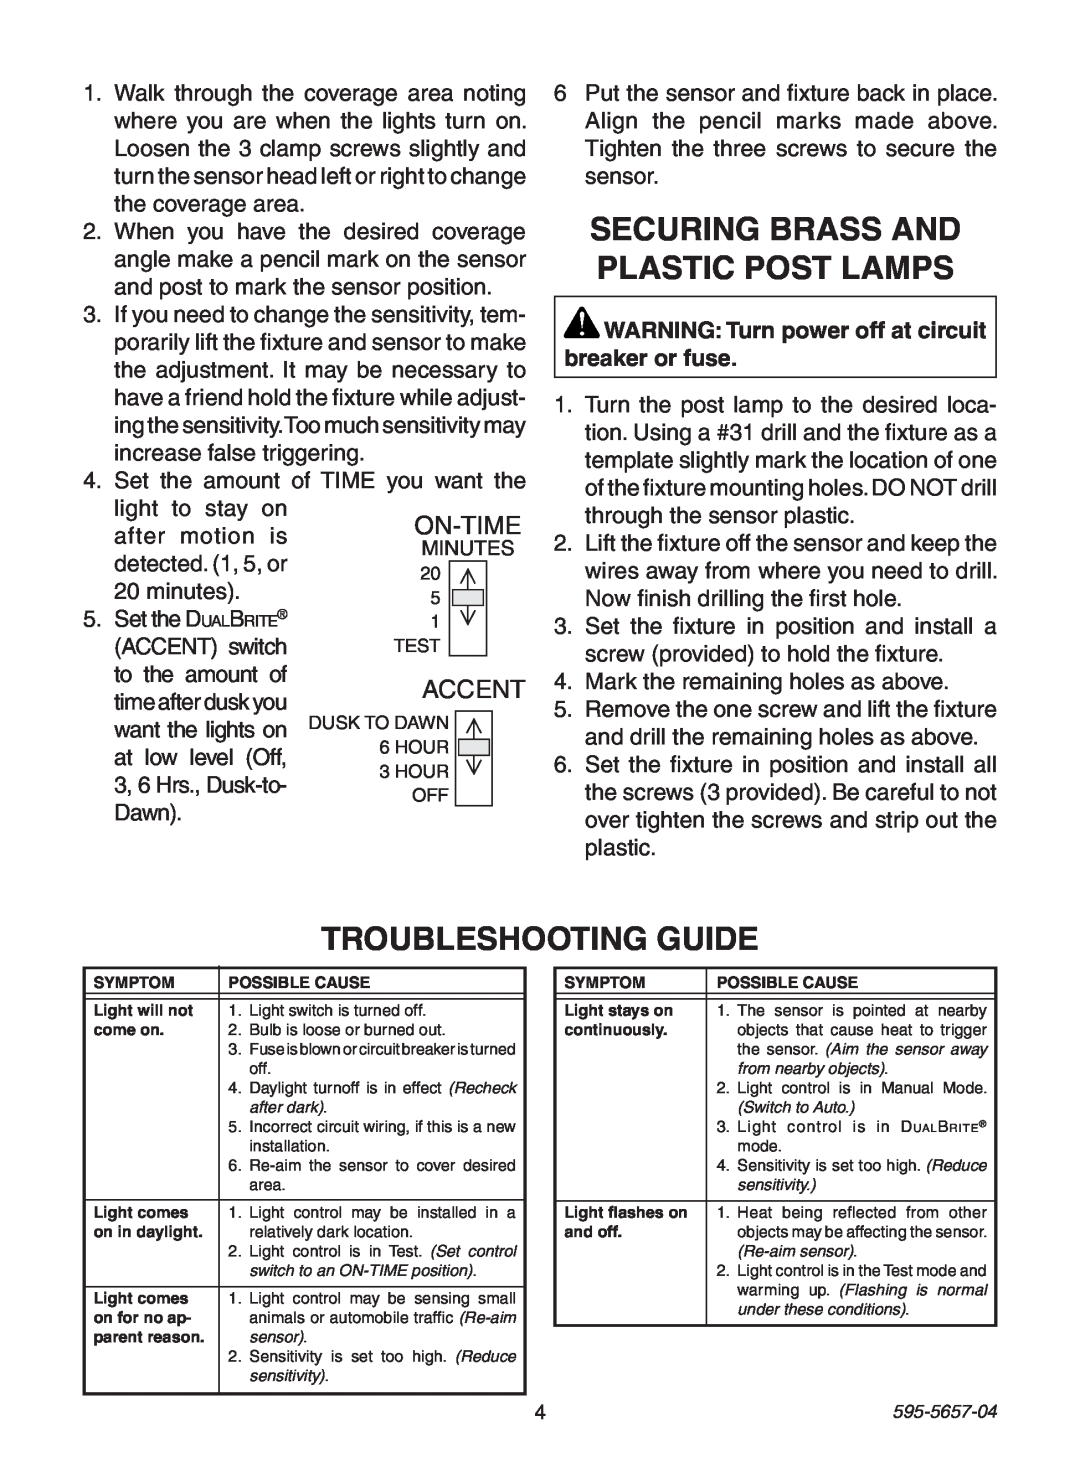 Heath Zenith SL-4100 warranty Securing Brass and Plastic Post Lamps, Troubleshooting Guide 